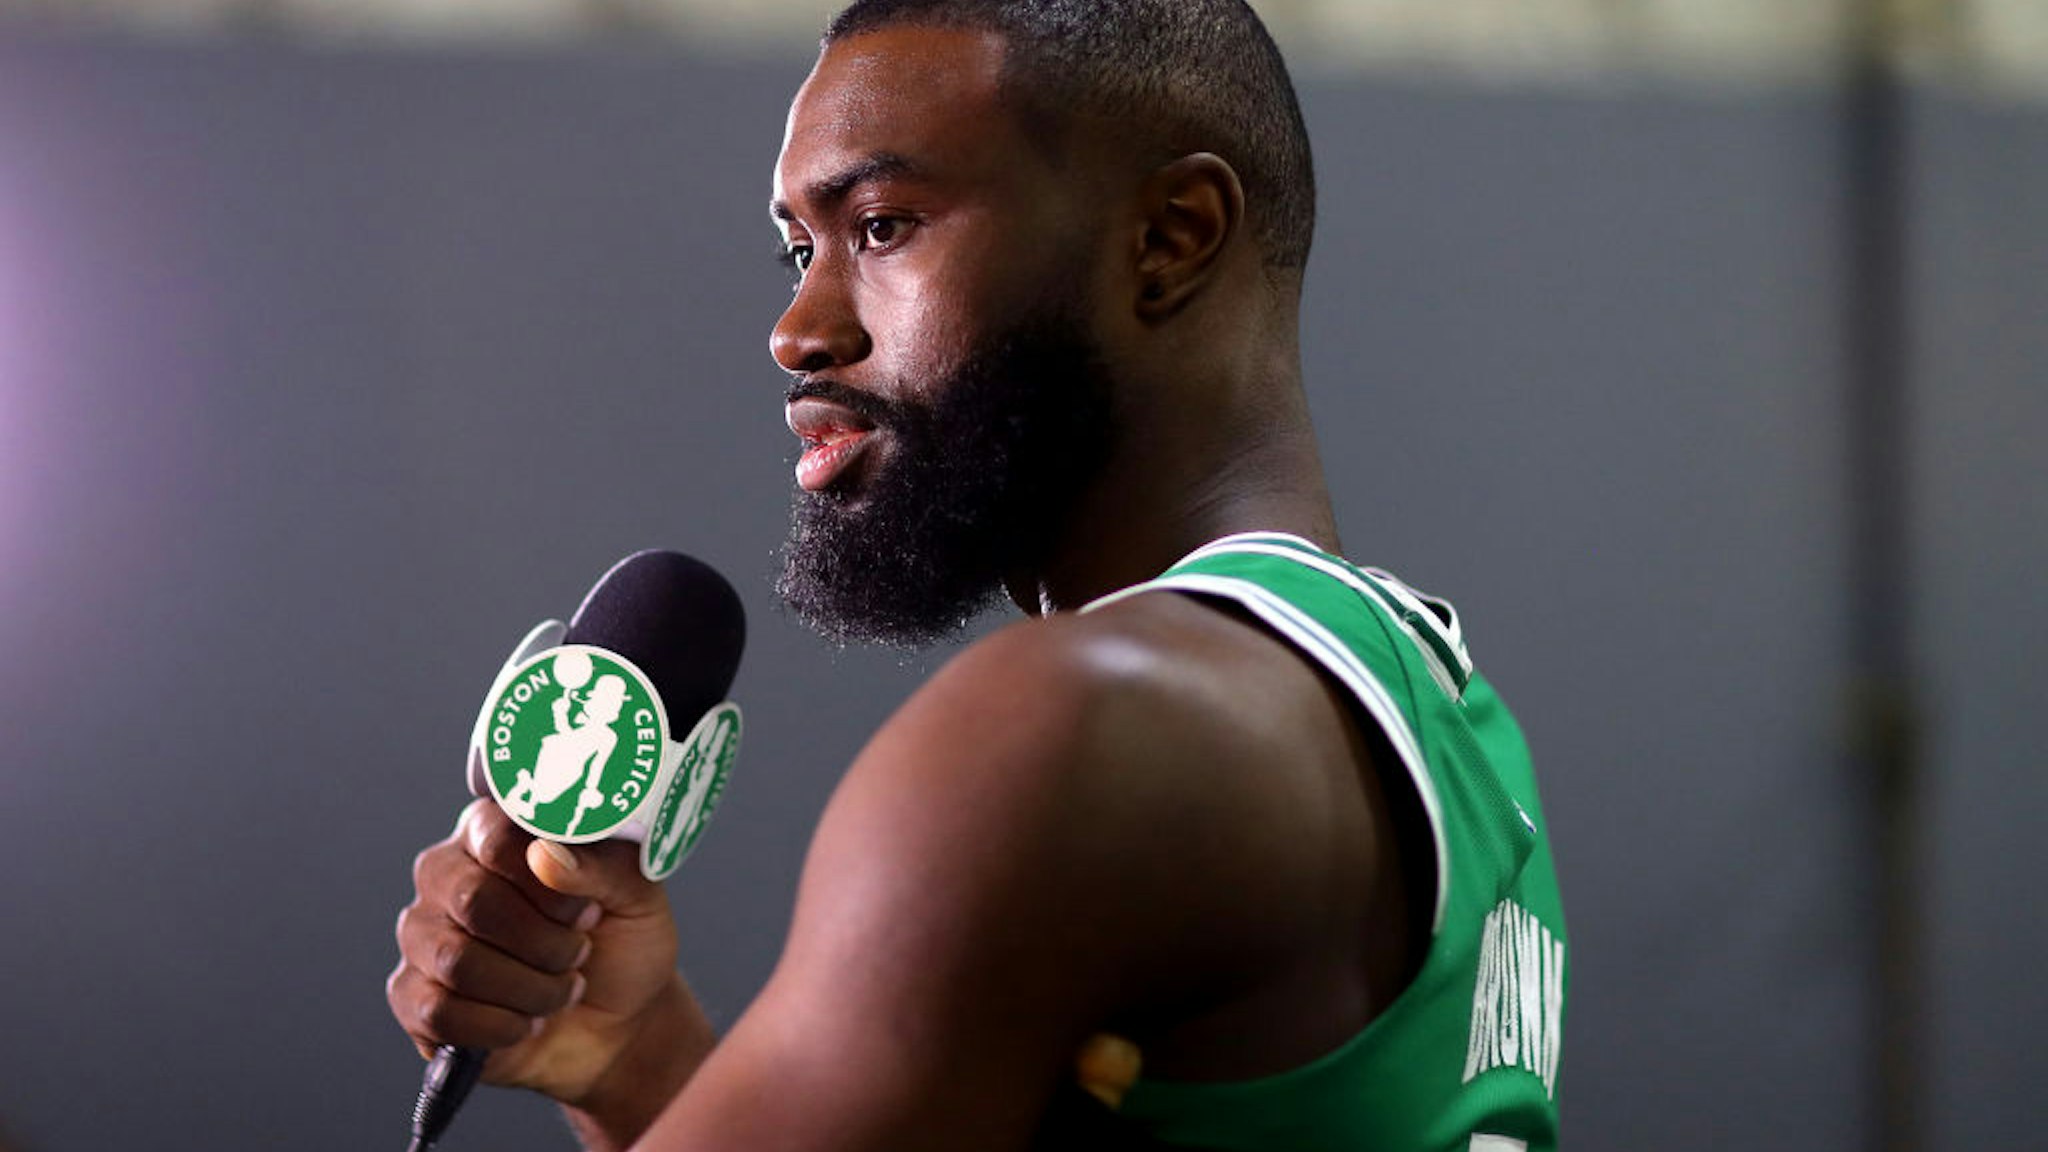 CANTON, MASSACHUSETTS - SEPTEMBER 30: Jaylen Brown #7 answers question during an interview on Celtics Media Day at High Output Studios on September 30, 2019 in Canton, Massachusetts. (Photo by Maddie Meyer/Getty Images)